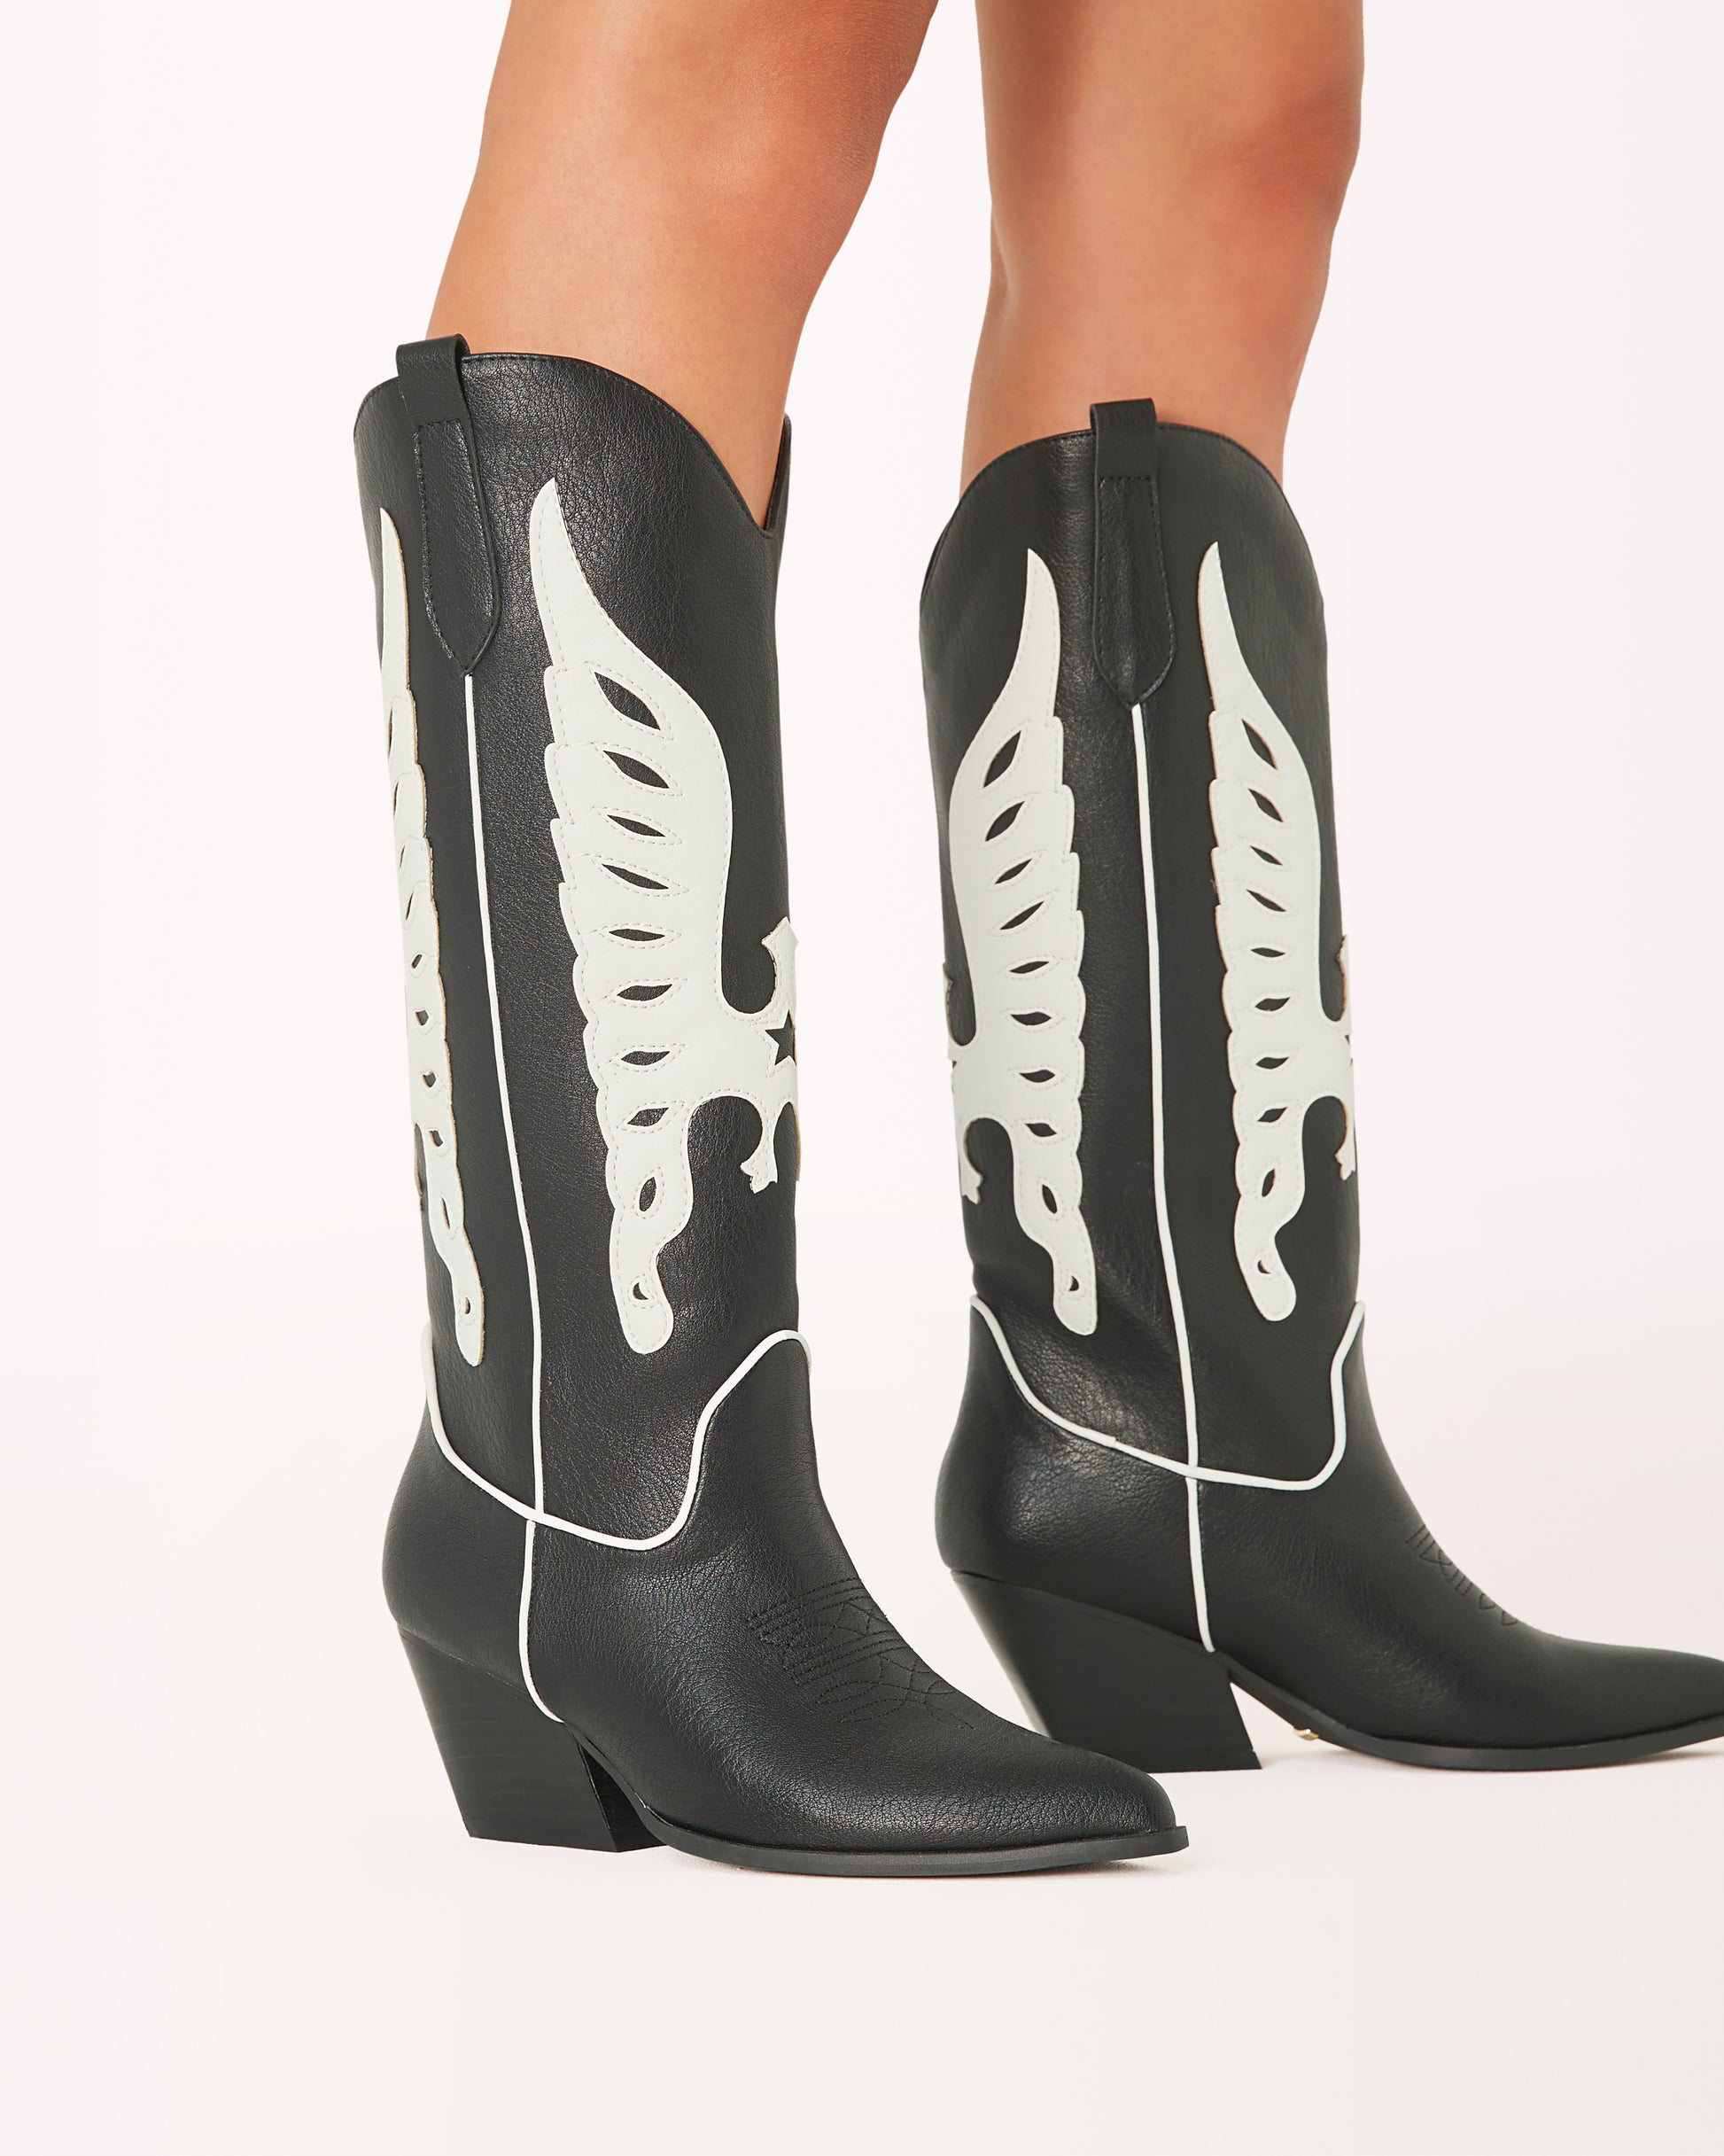 Black and White Cowboy Boot